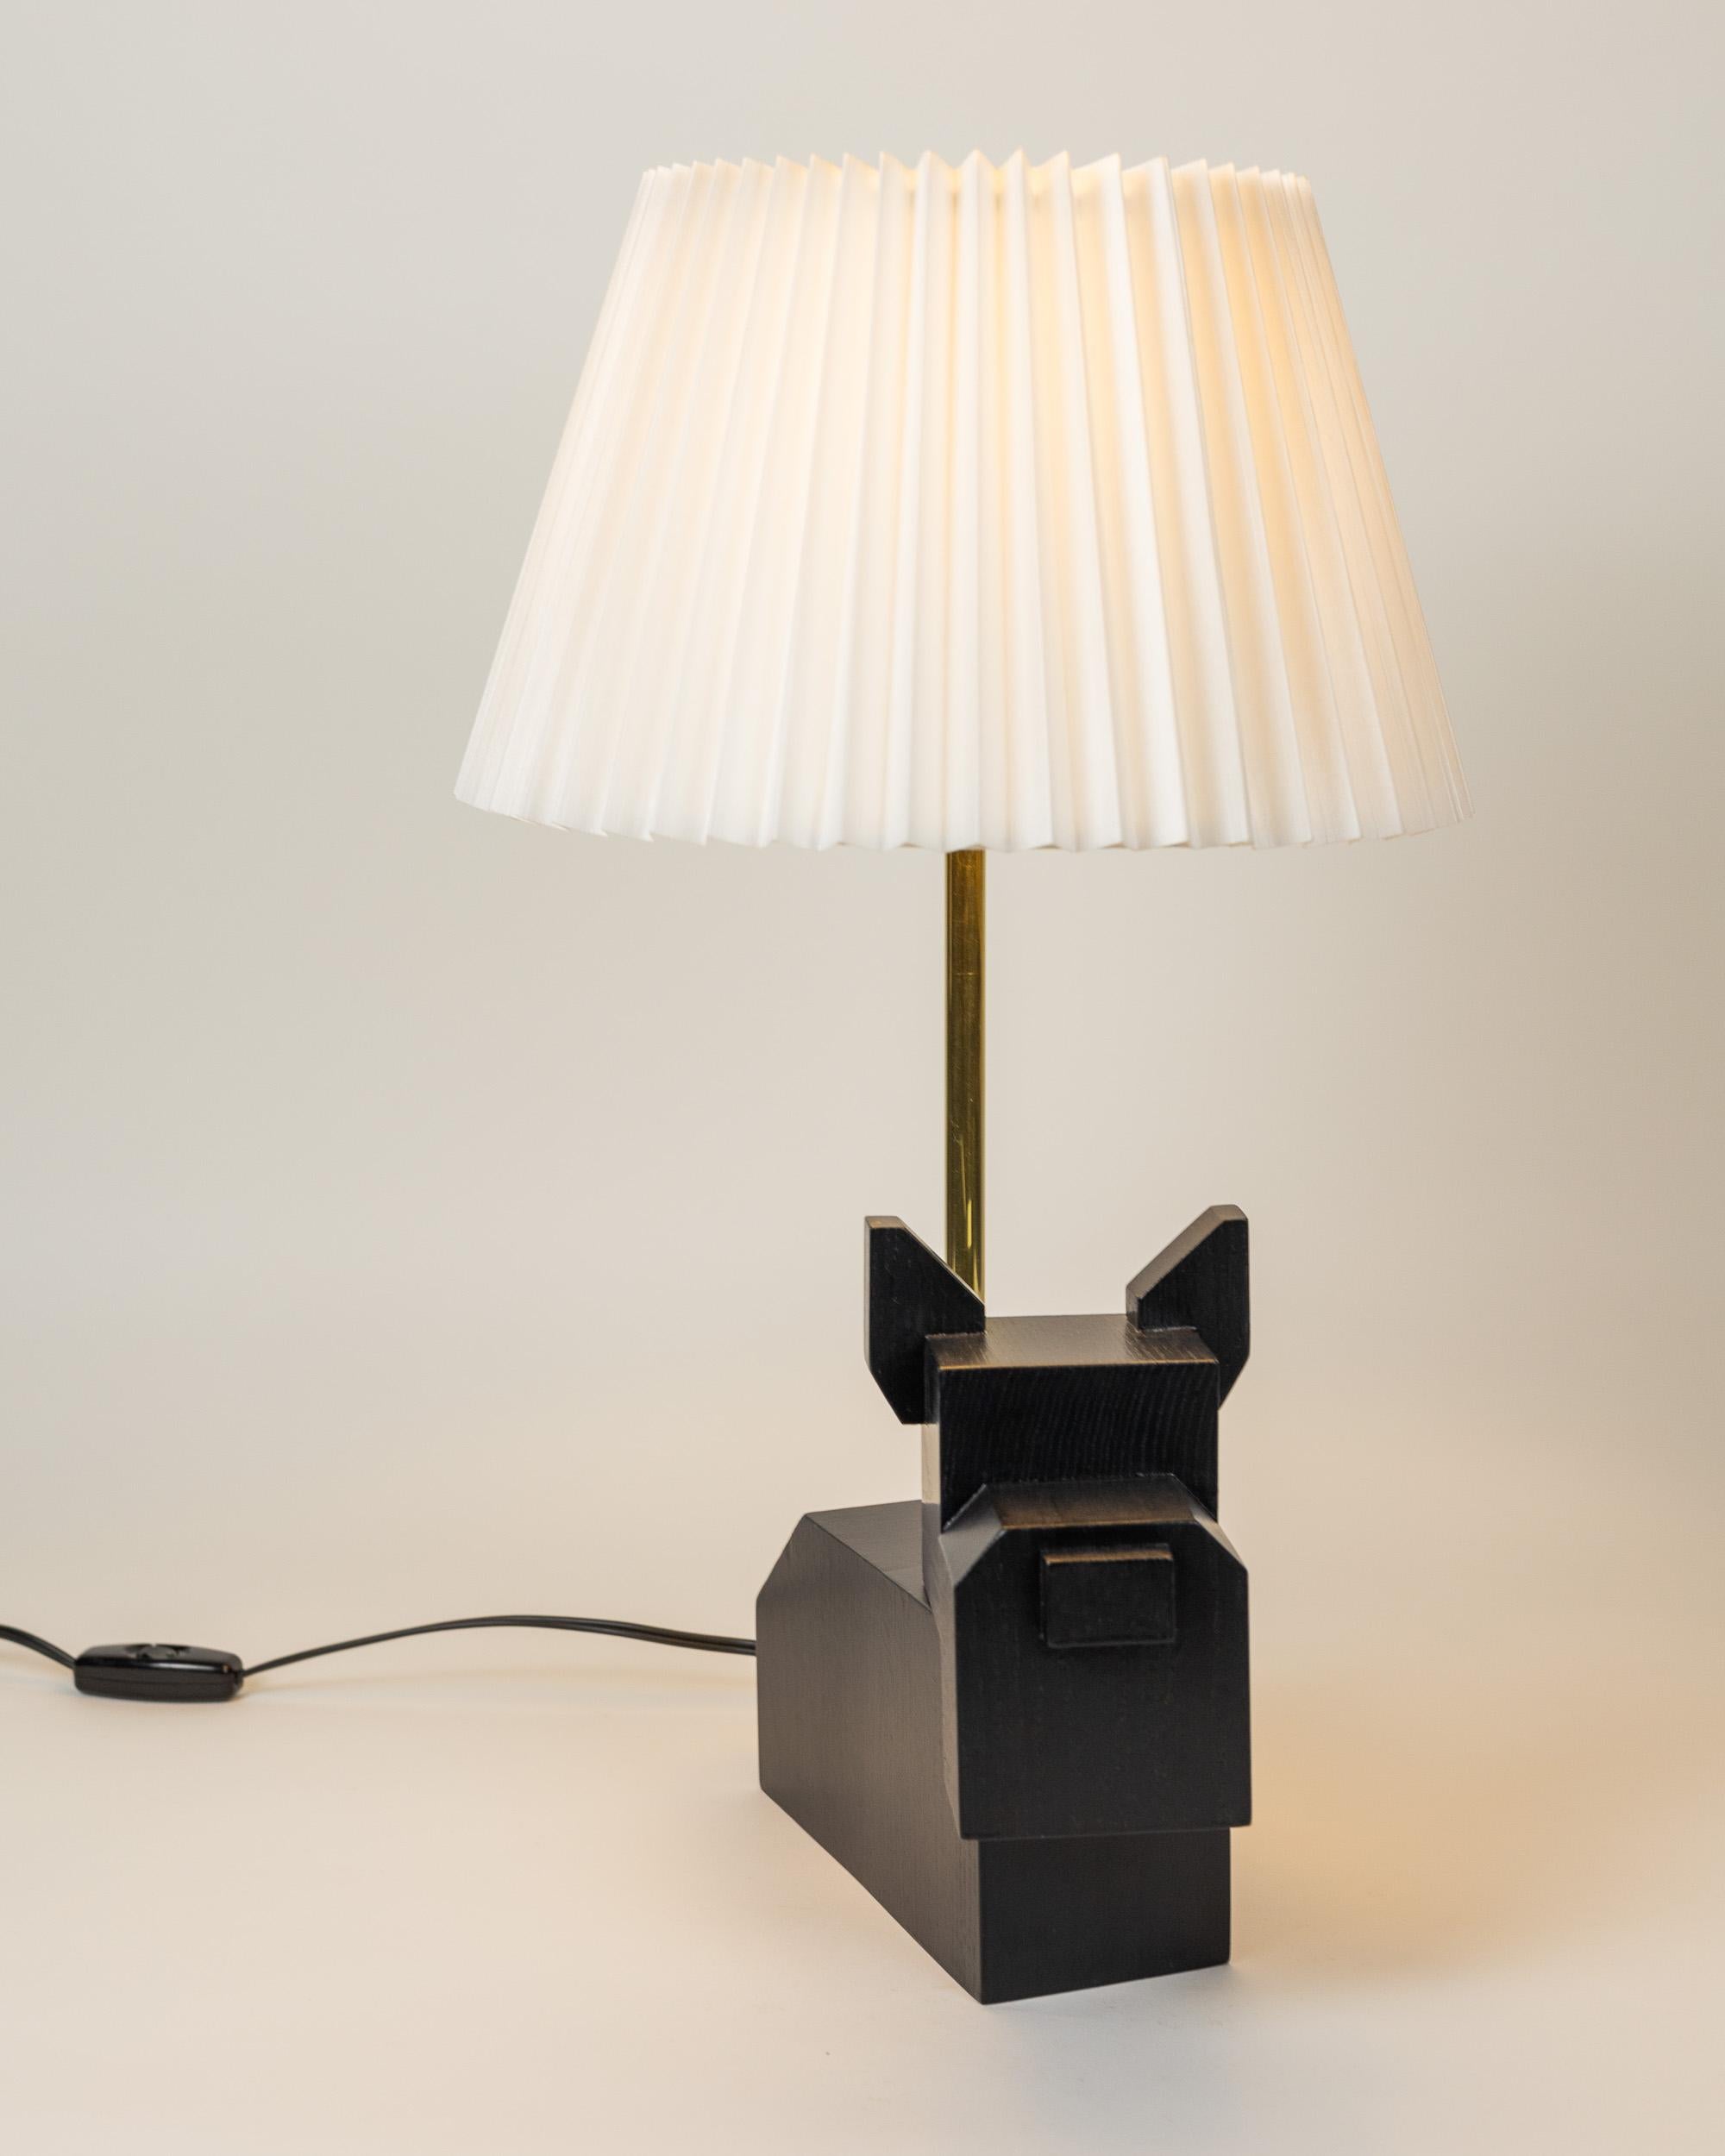 Hand-Crafted In-stock, Black Doggy Lamp, Wood Black Table Light with White Pleated Shade, Dog For Sale